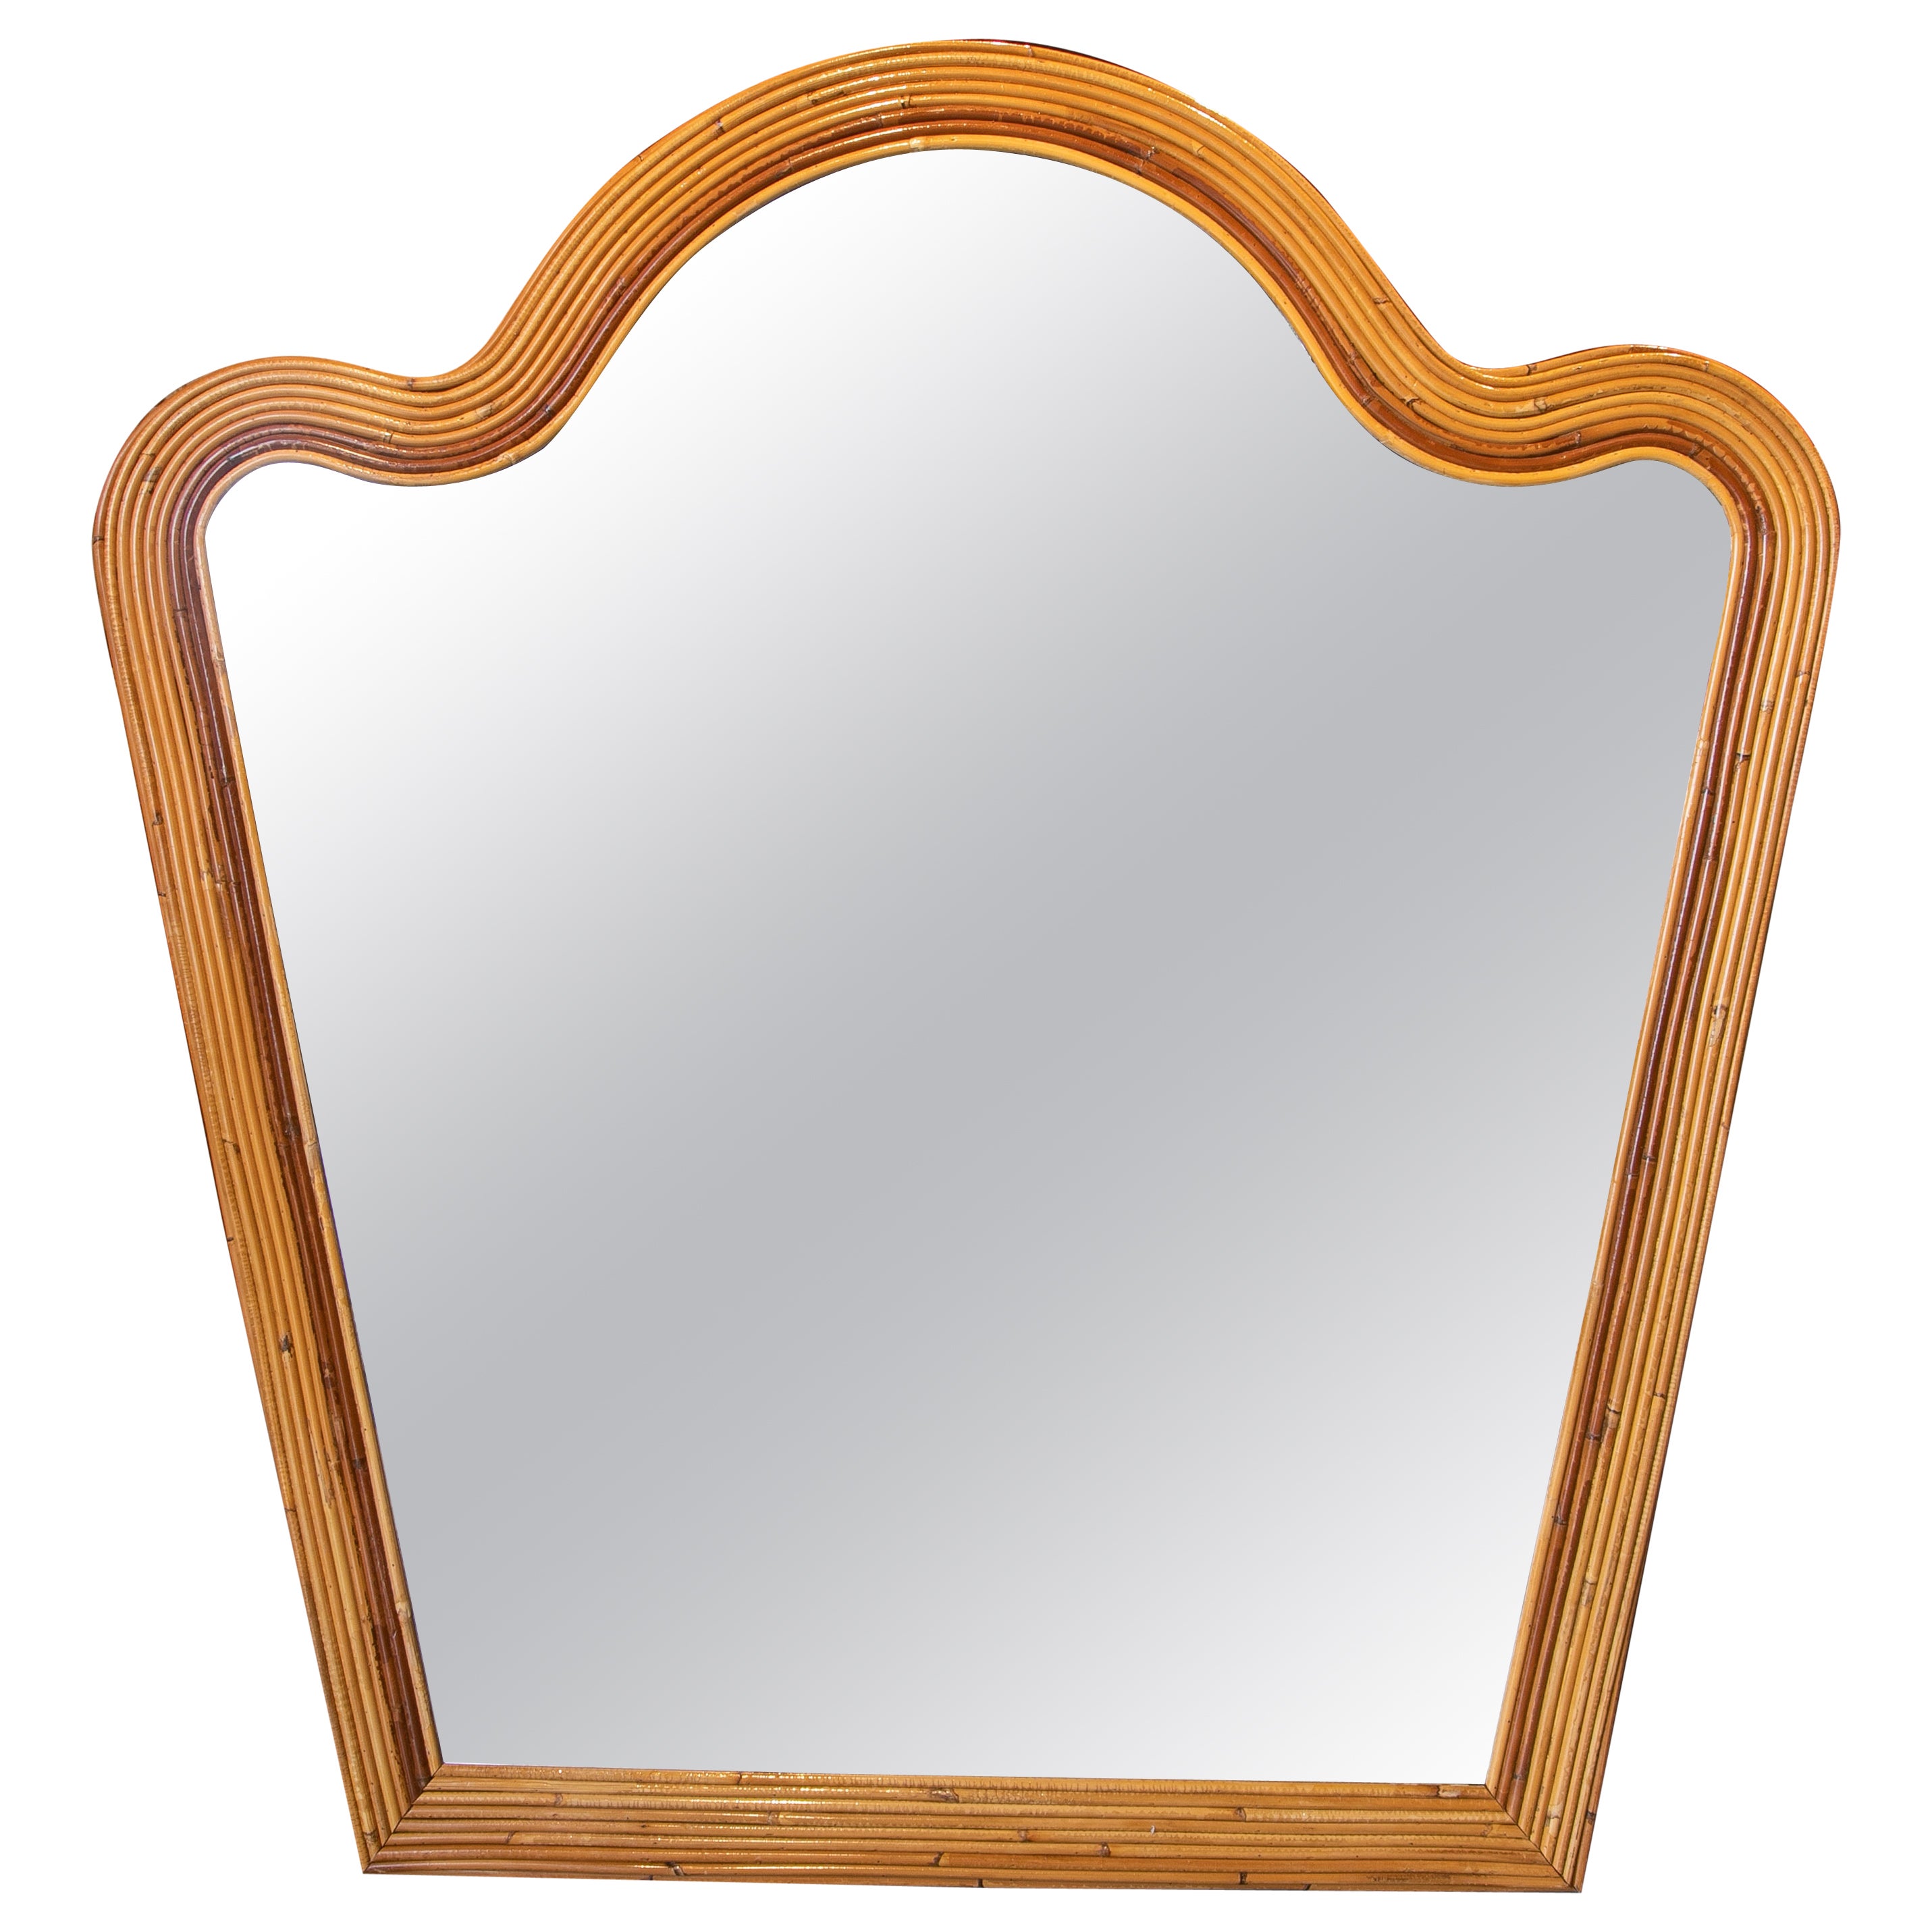 1980s Handmade Bamboo Mirror with Wavy Shapes For Sale